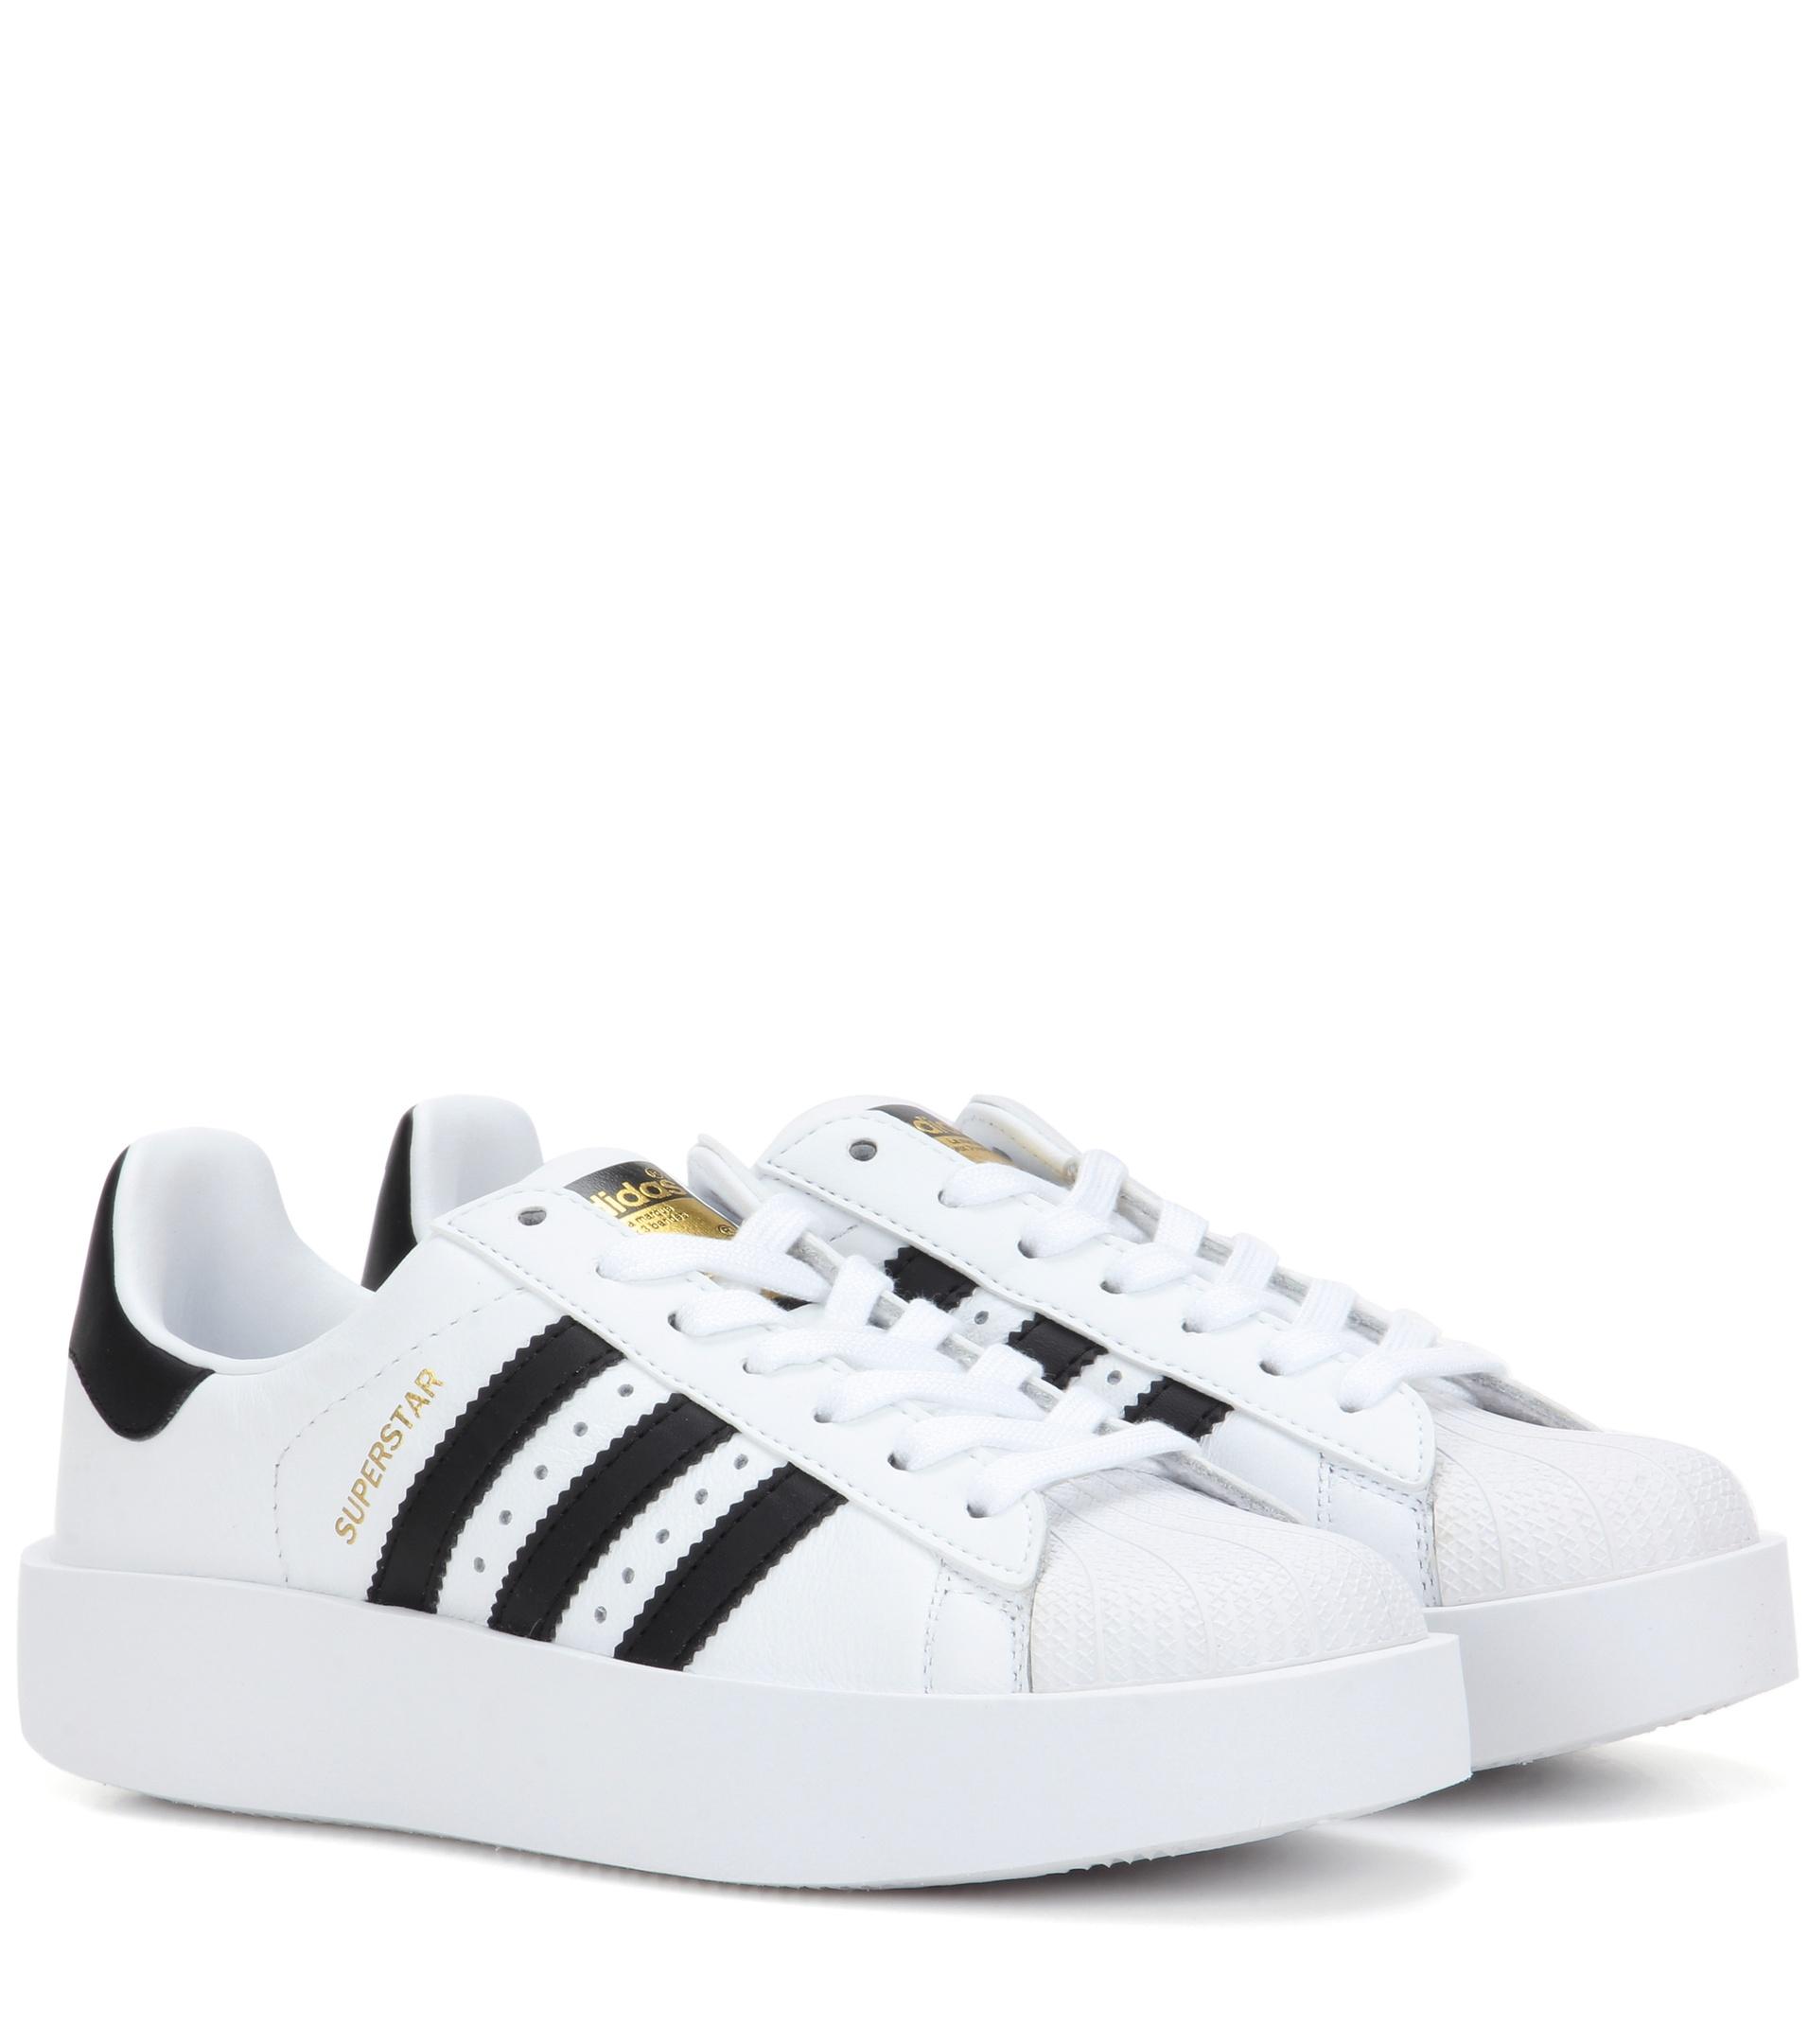 adidas Originals Superstar Bold Leather Sneakers in White - Lyst